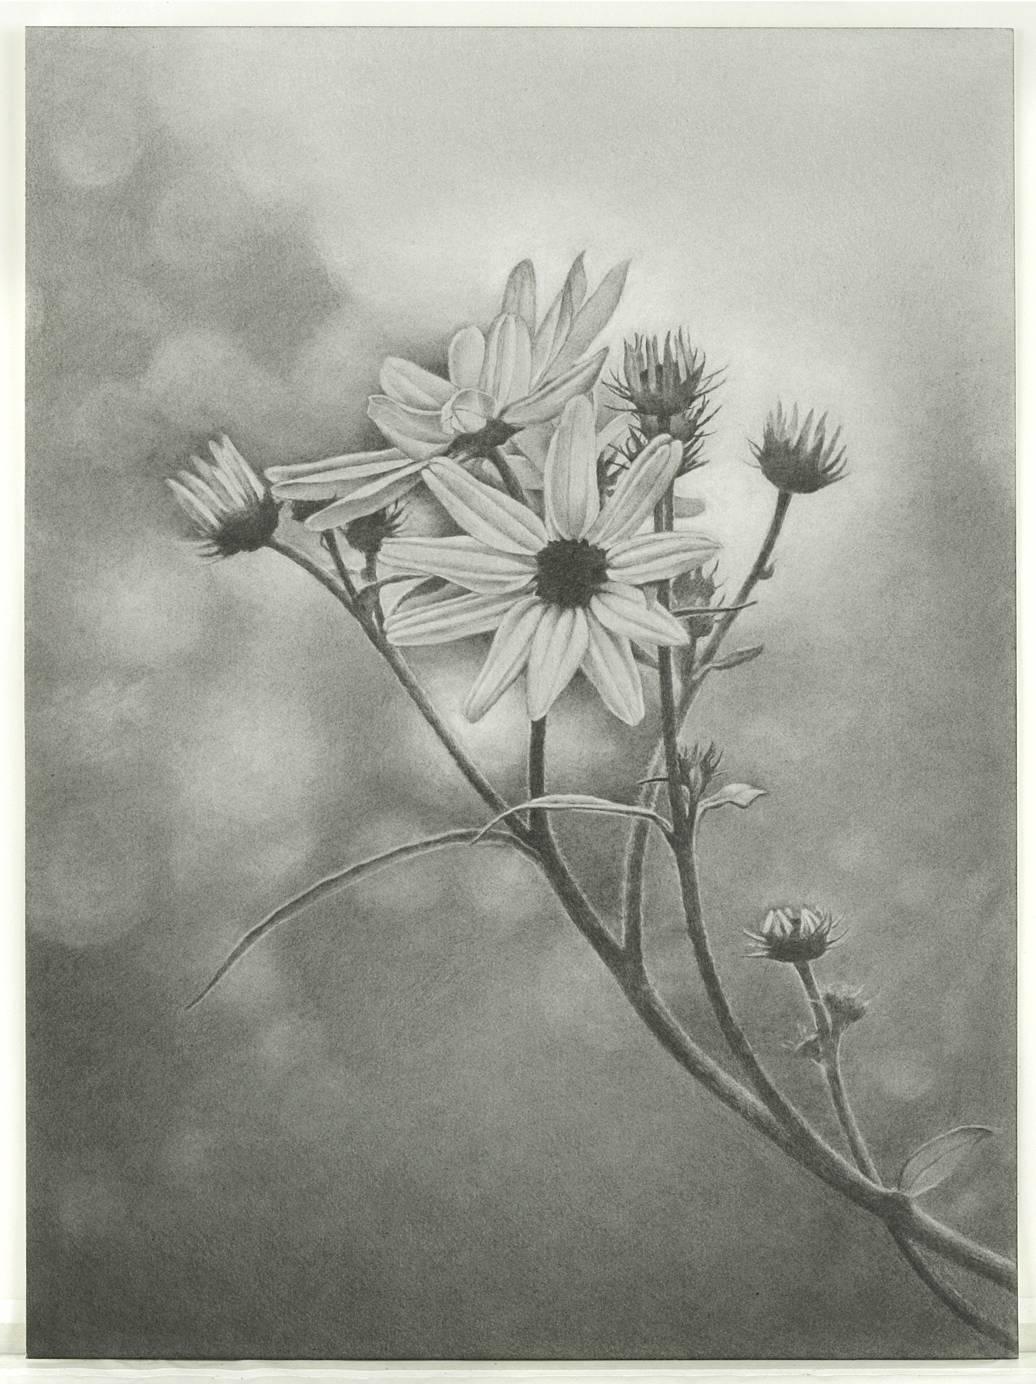 Wildflower, Central Park, photorealist graphite drawing, 2011